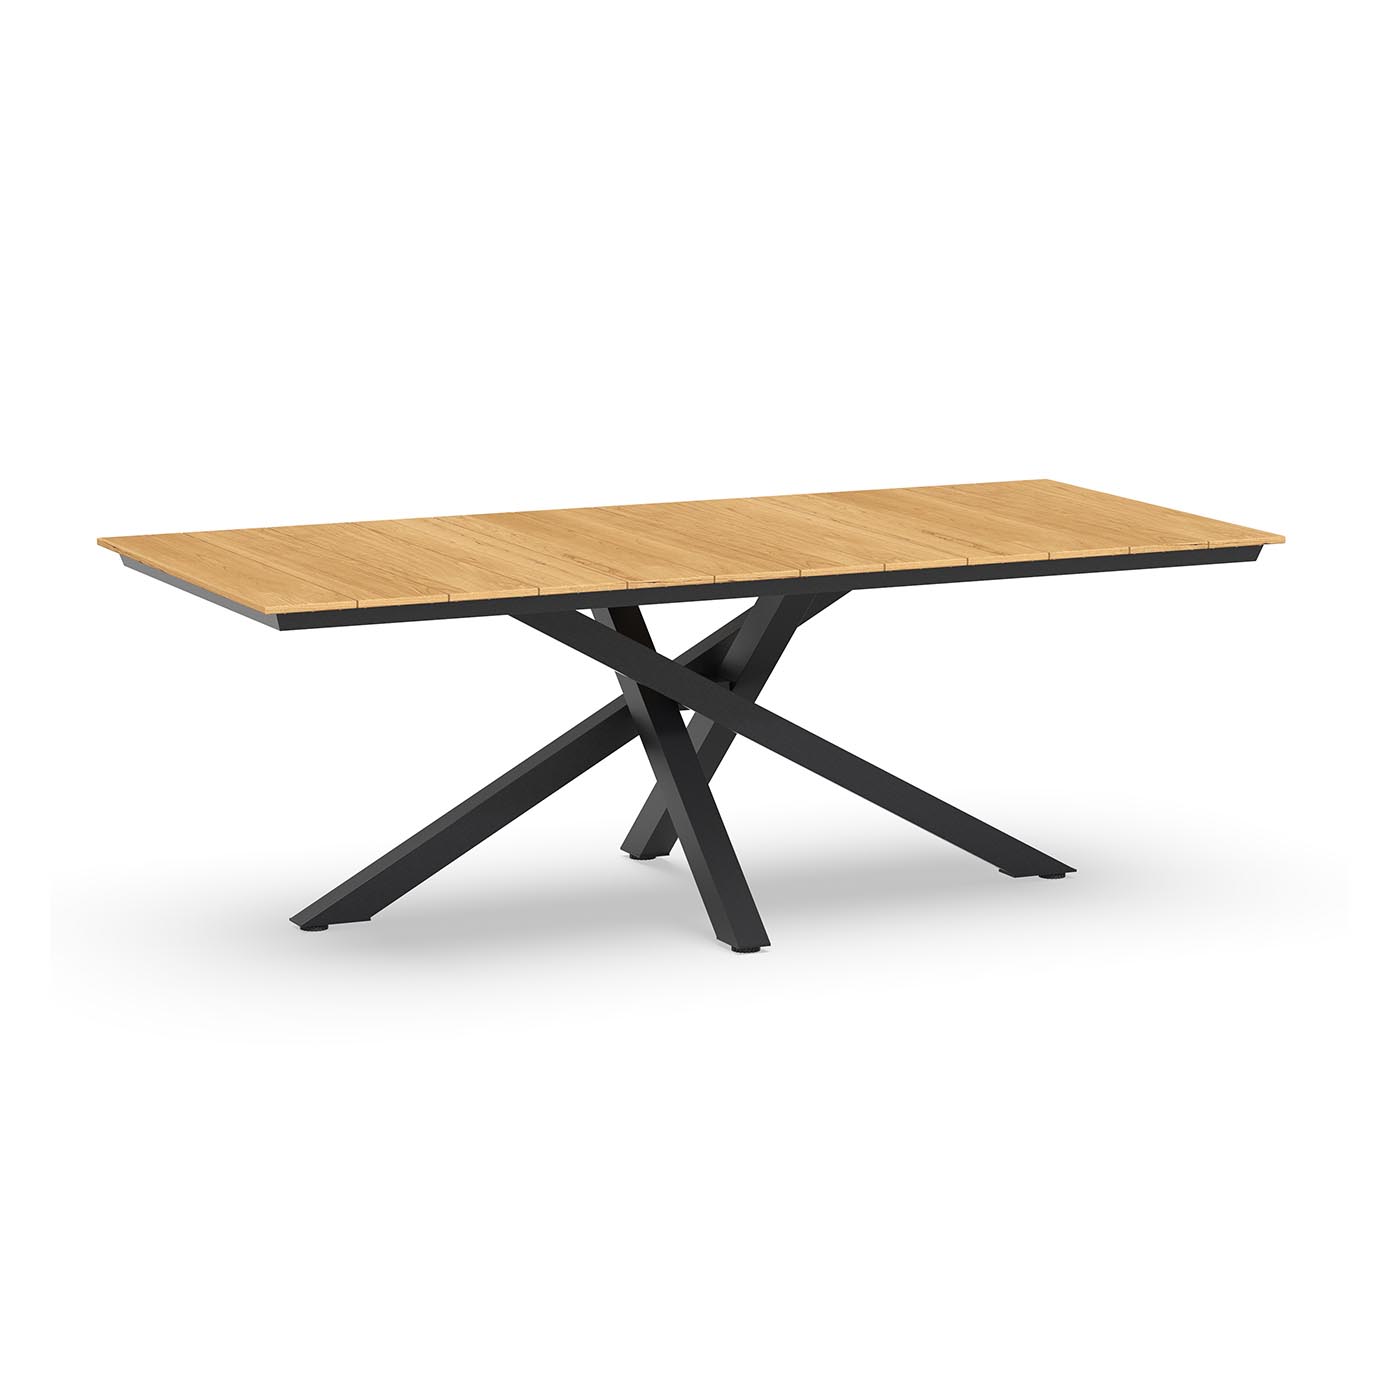 Orion Dining Table Teak 220 x 100 cm Charcoal